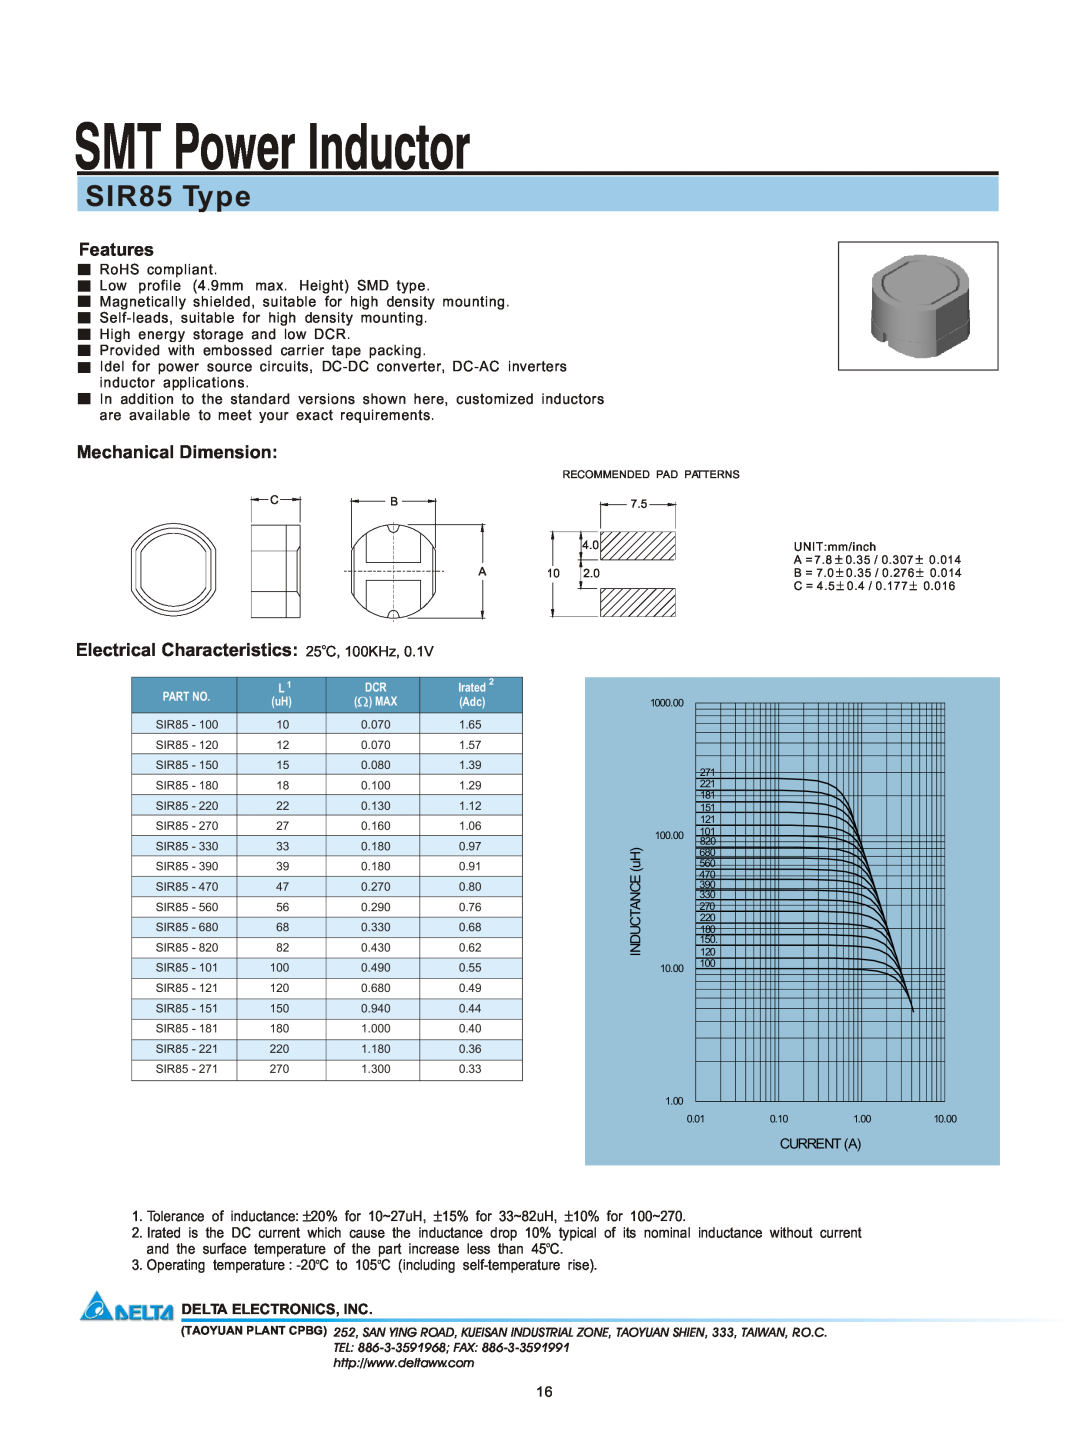 Delta Electronics manual SMT Power Inductor, SIR85 Type, Features, Mechanical Dimension, Delta Electronics, Inc 